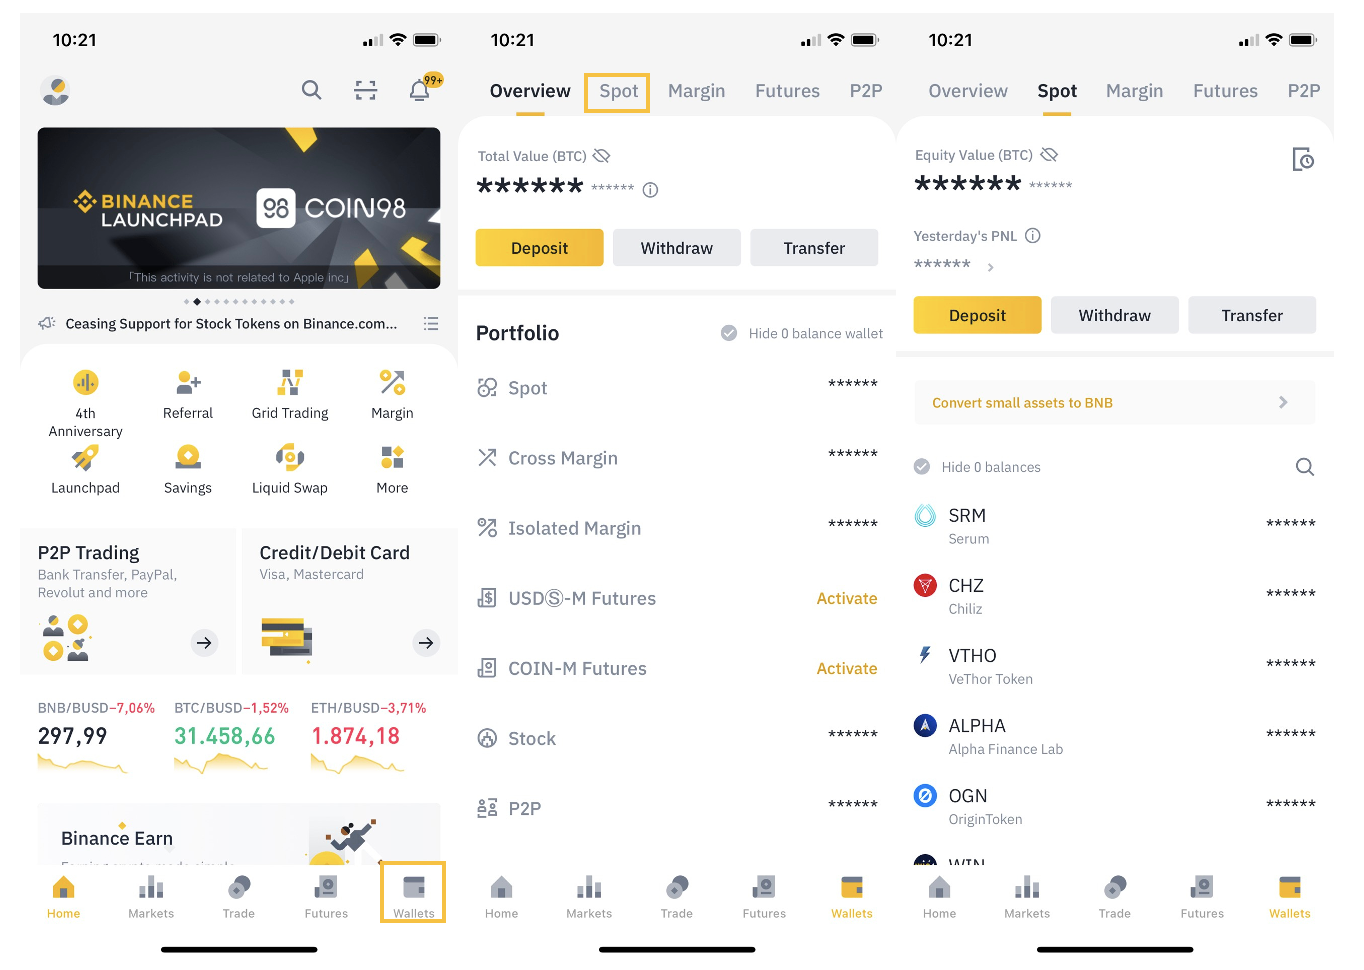 How To Transfer Coins From Binance Exchange To Coin98 Super App and Vice  Versa - Coin98 Finance